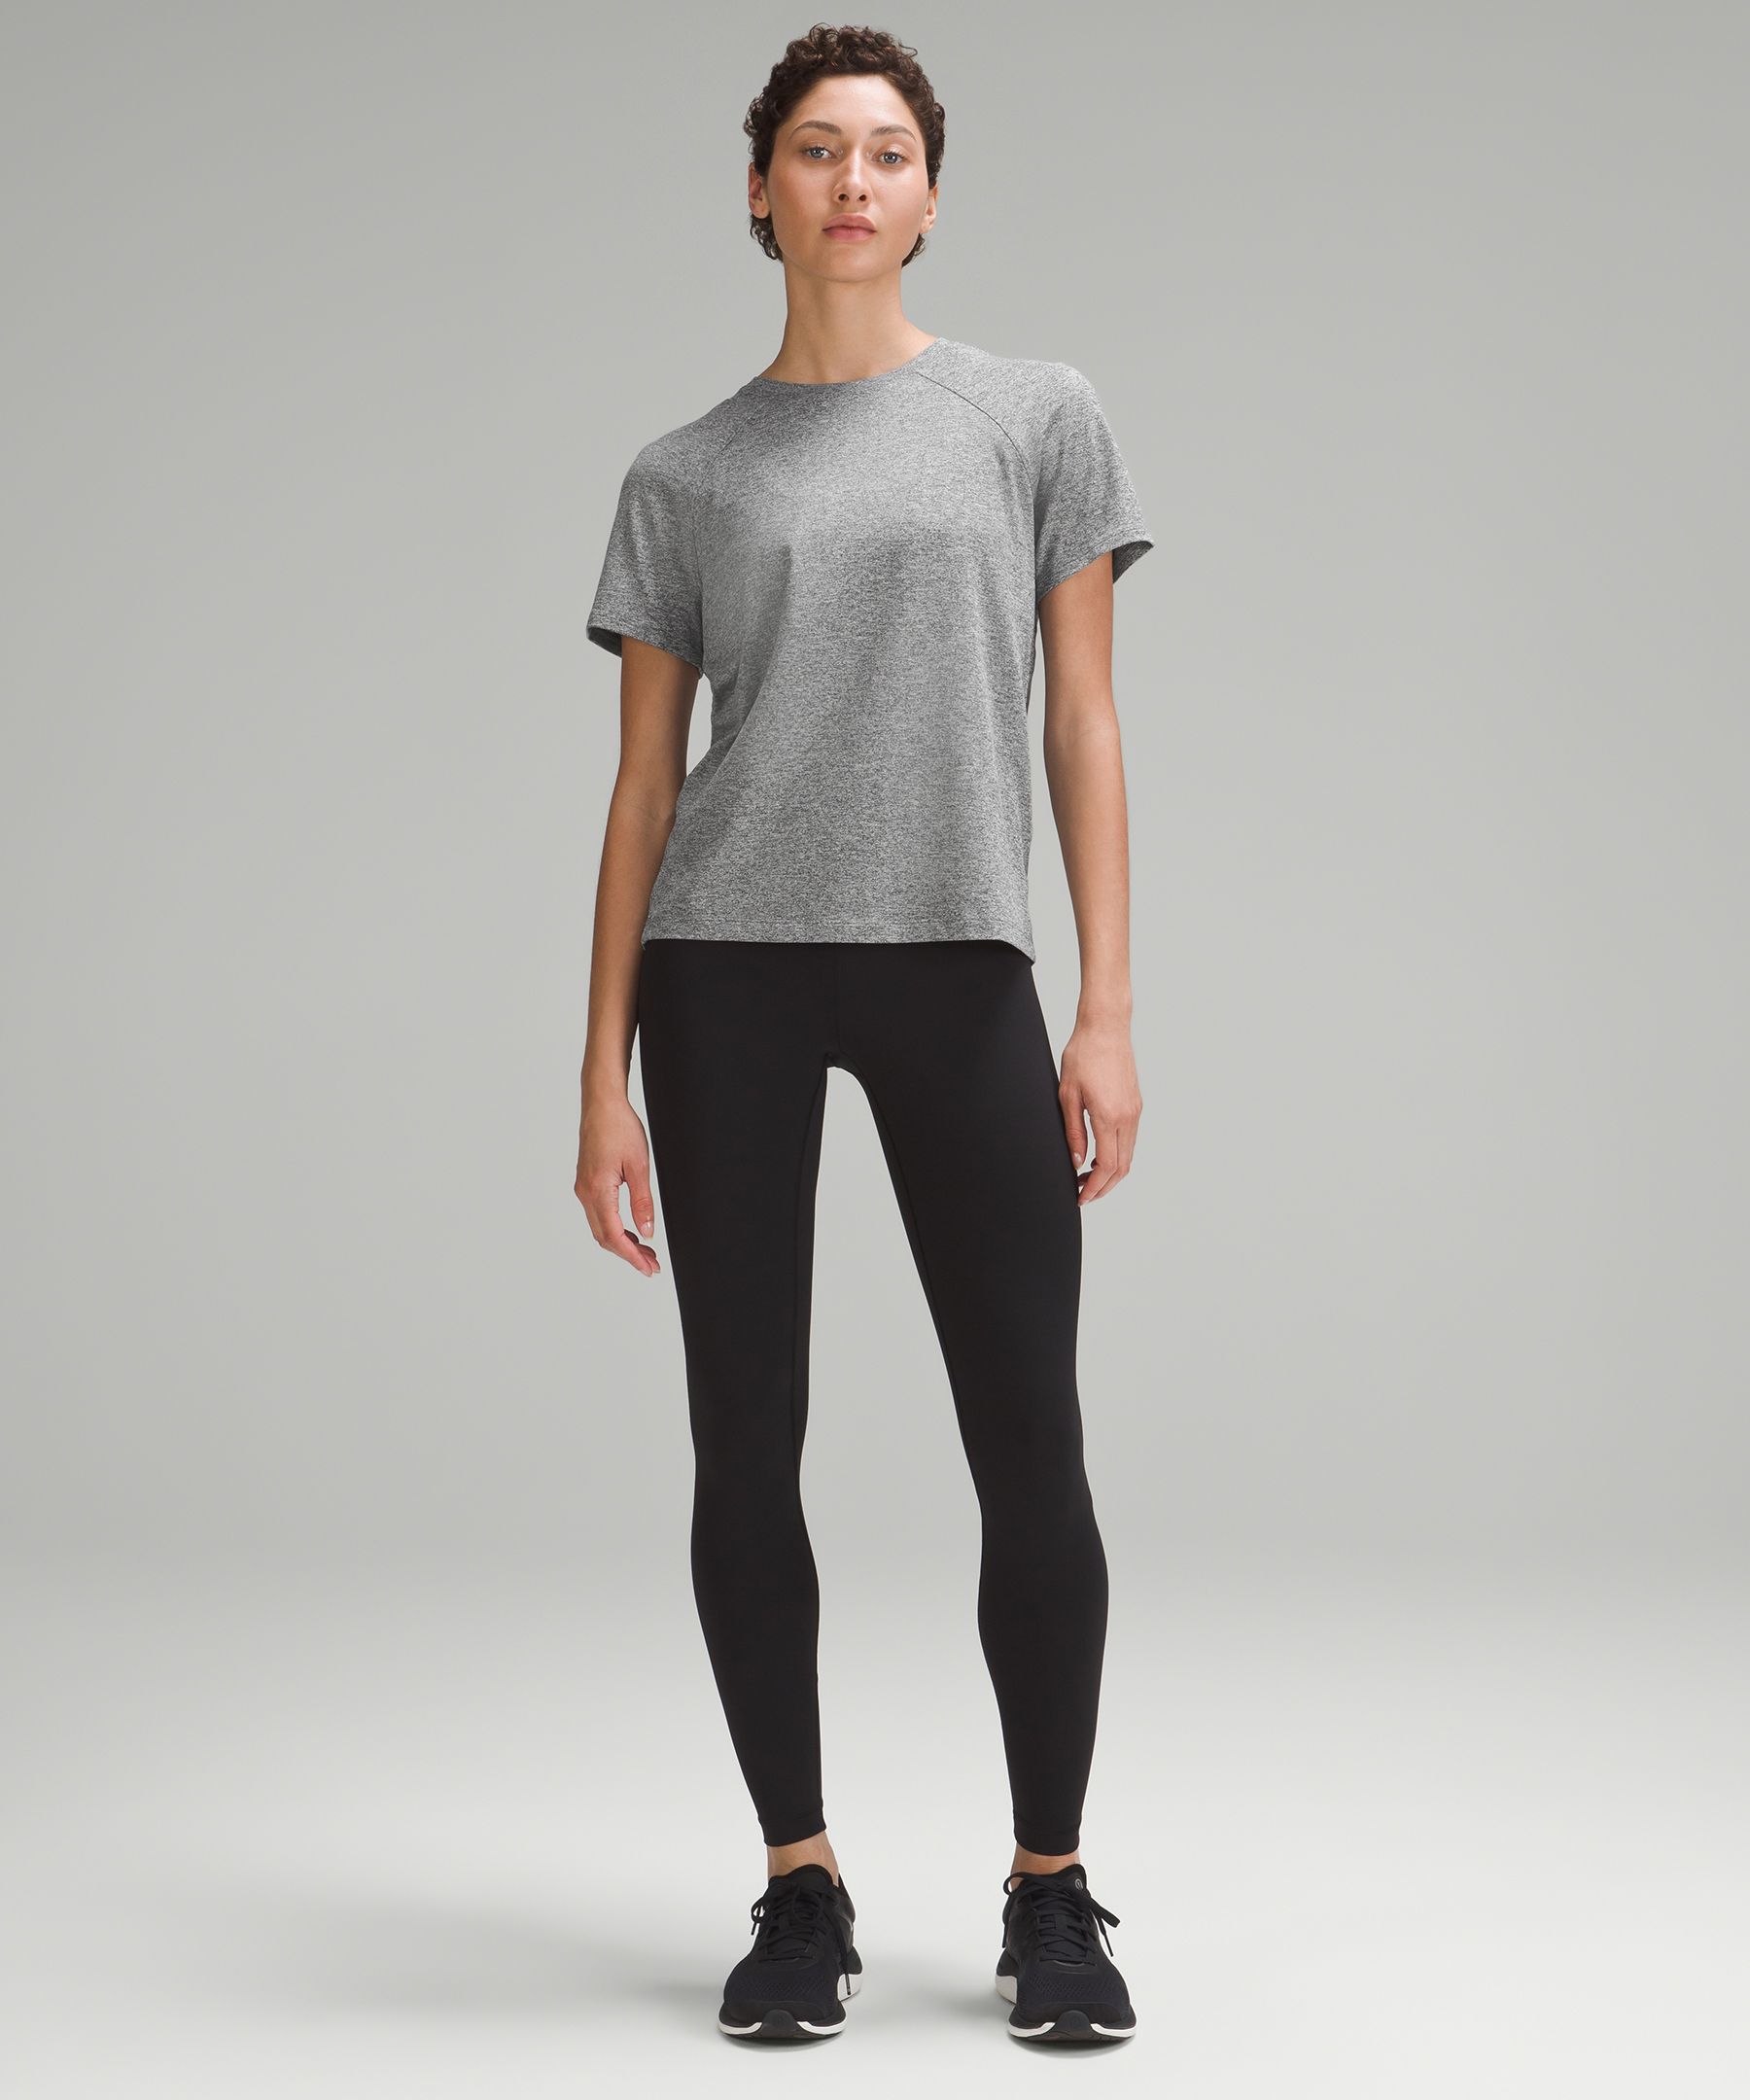 Lululemon athletica License to Train Classic-Fit T-Shirt, Women's Short  Sleeve Shirts & Tee's